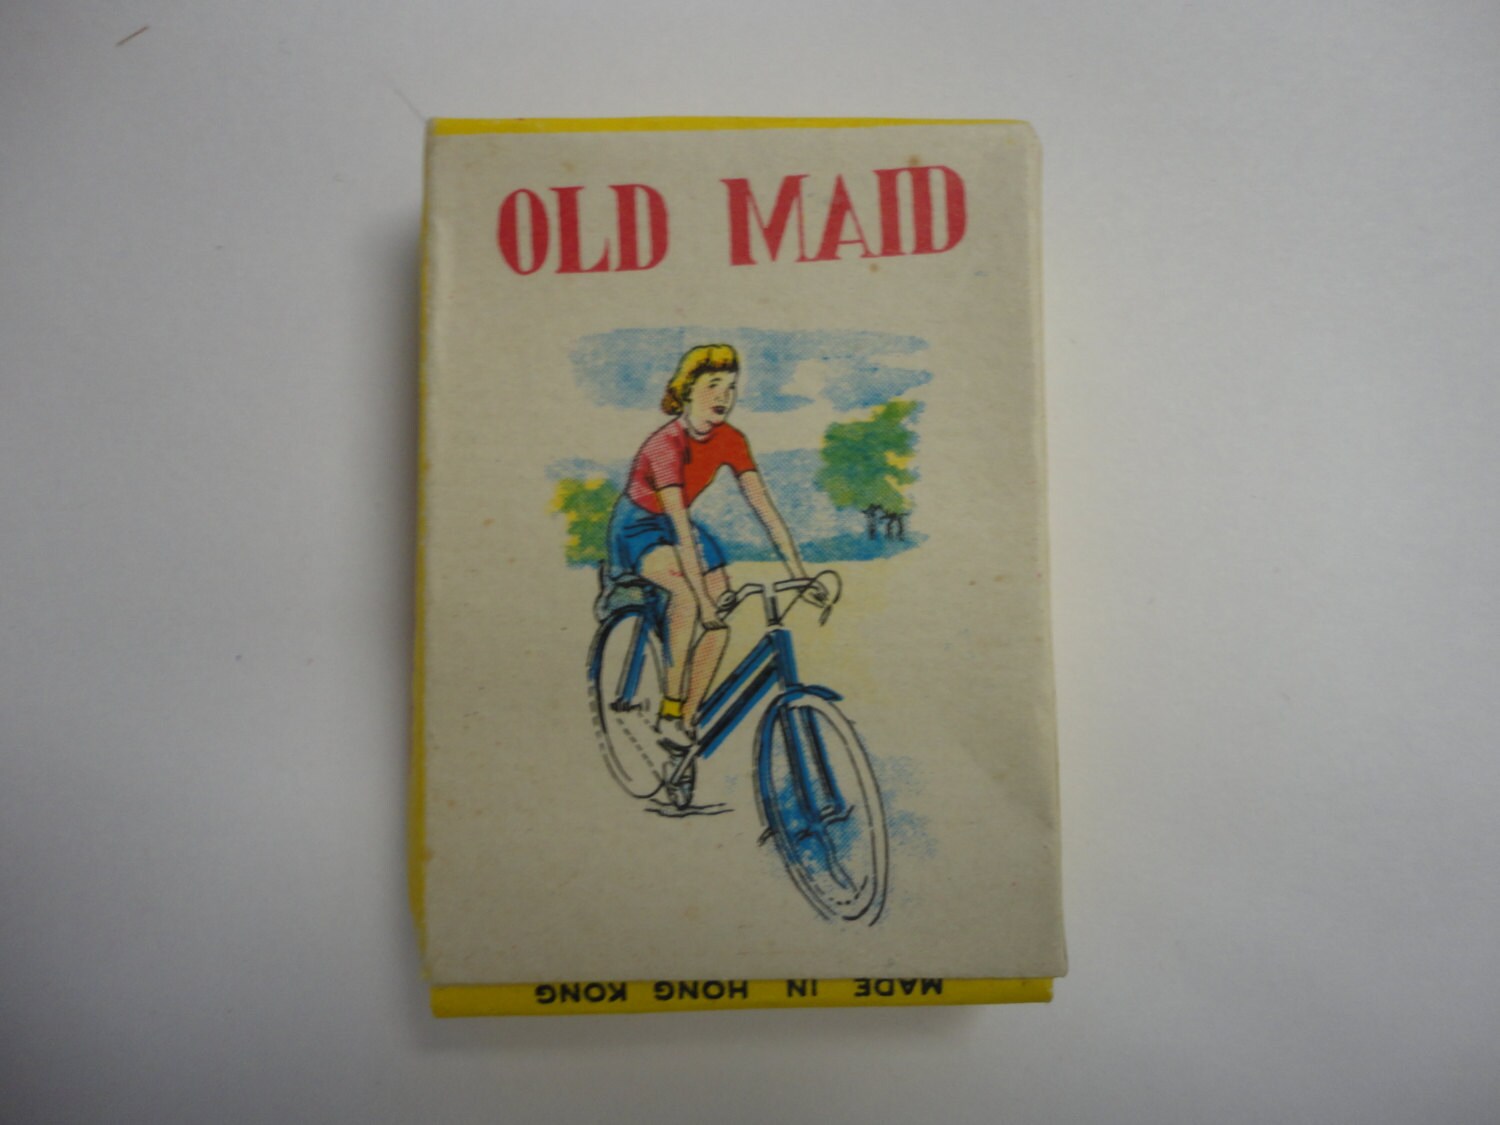 monsters old maid playing cards